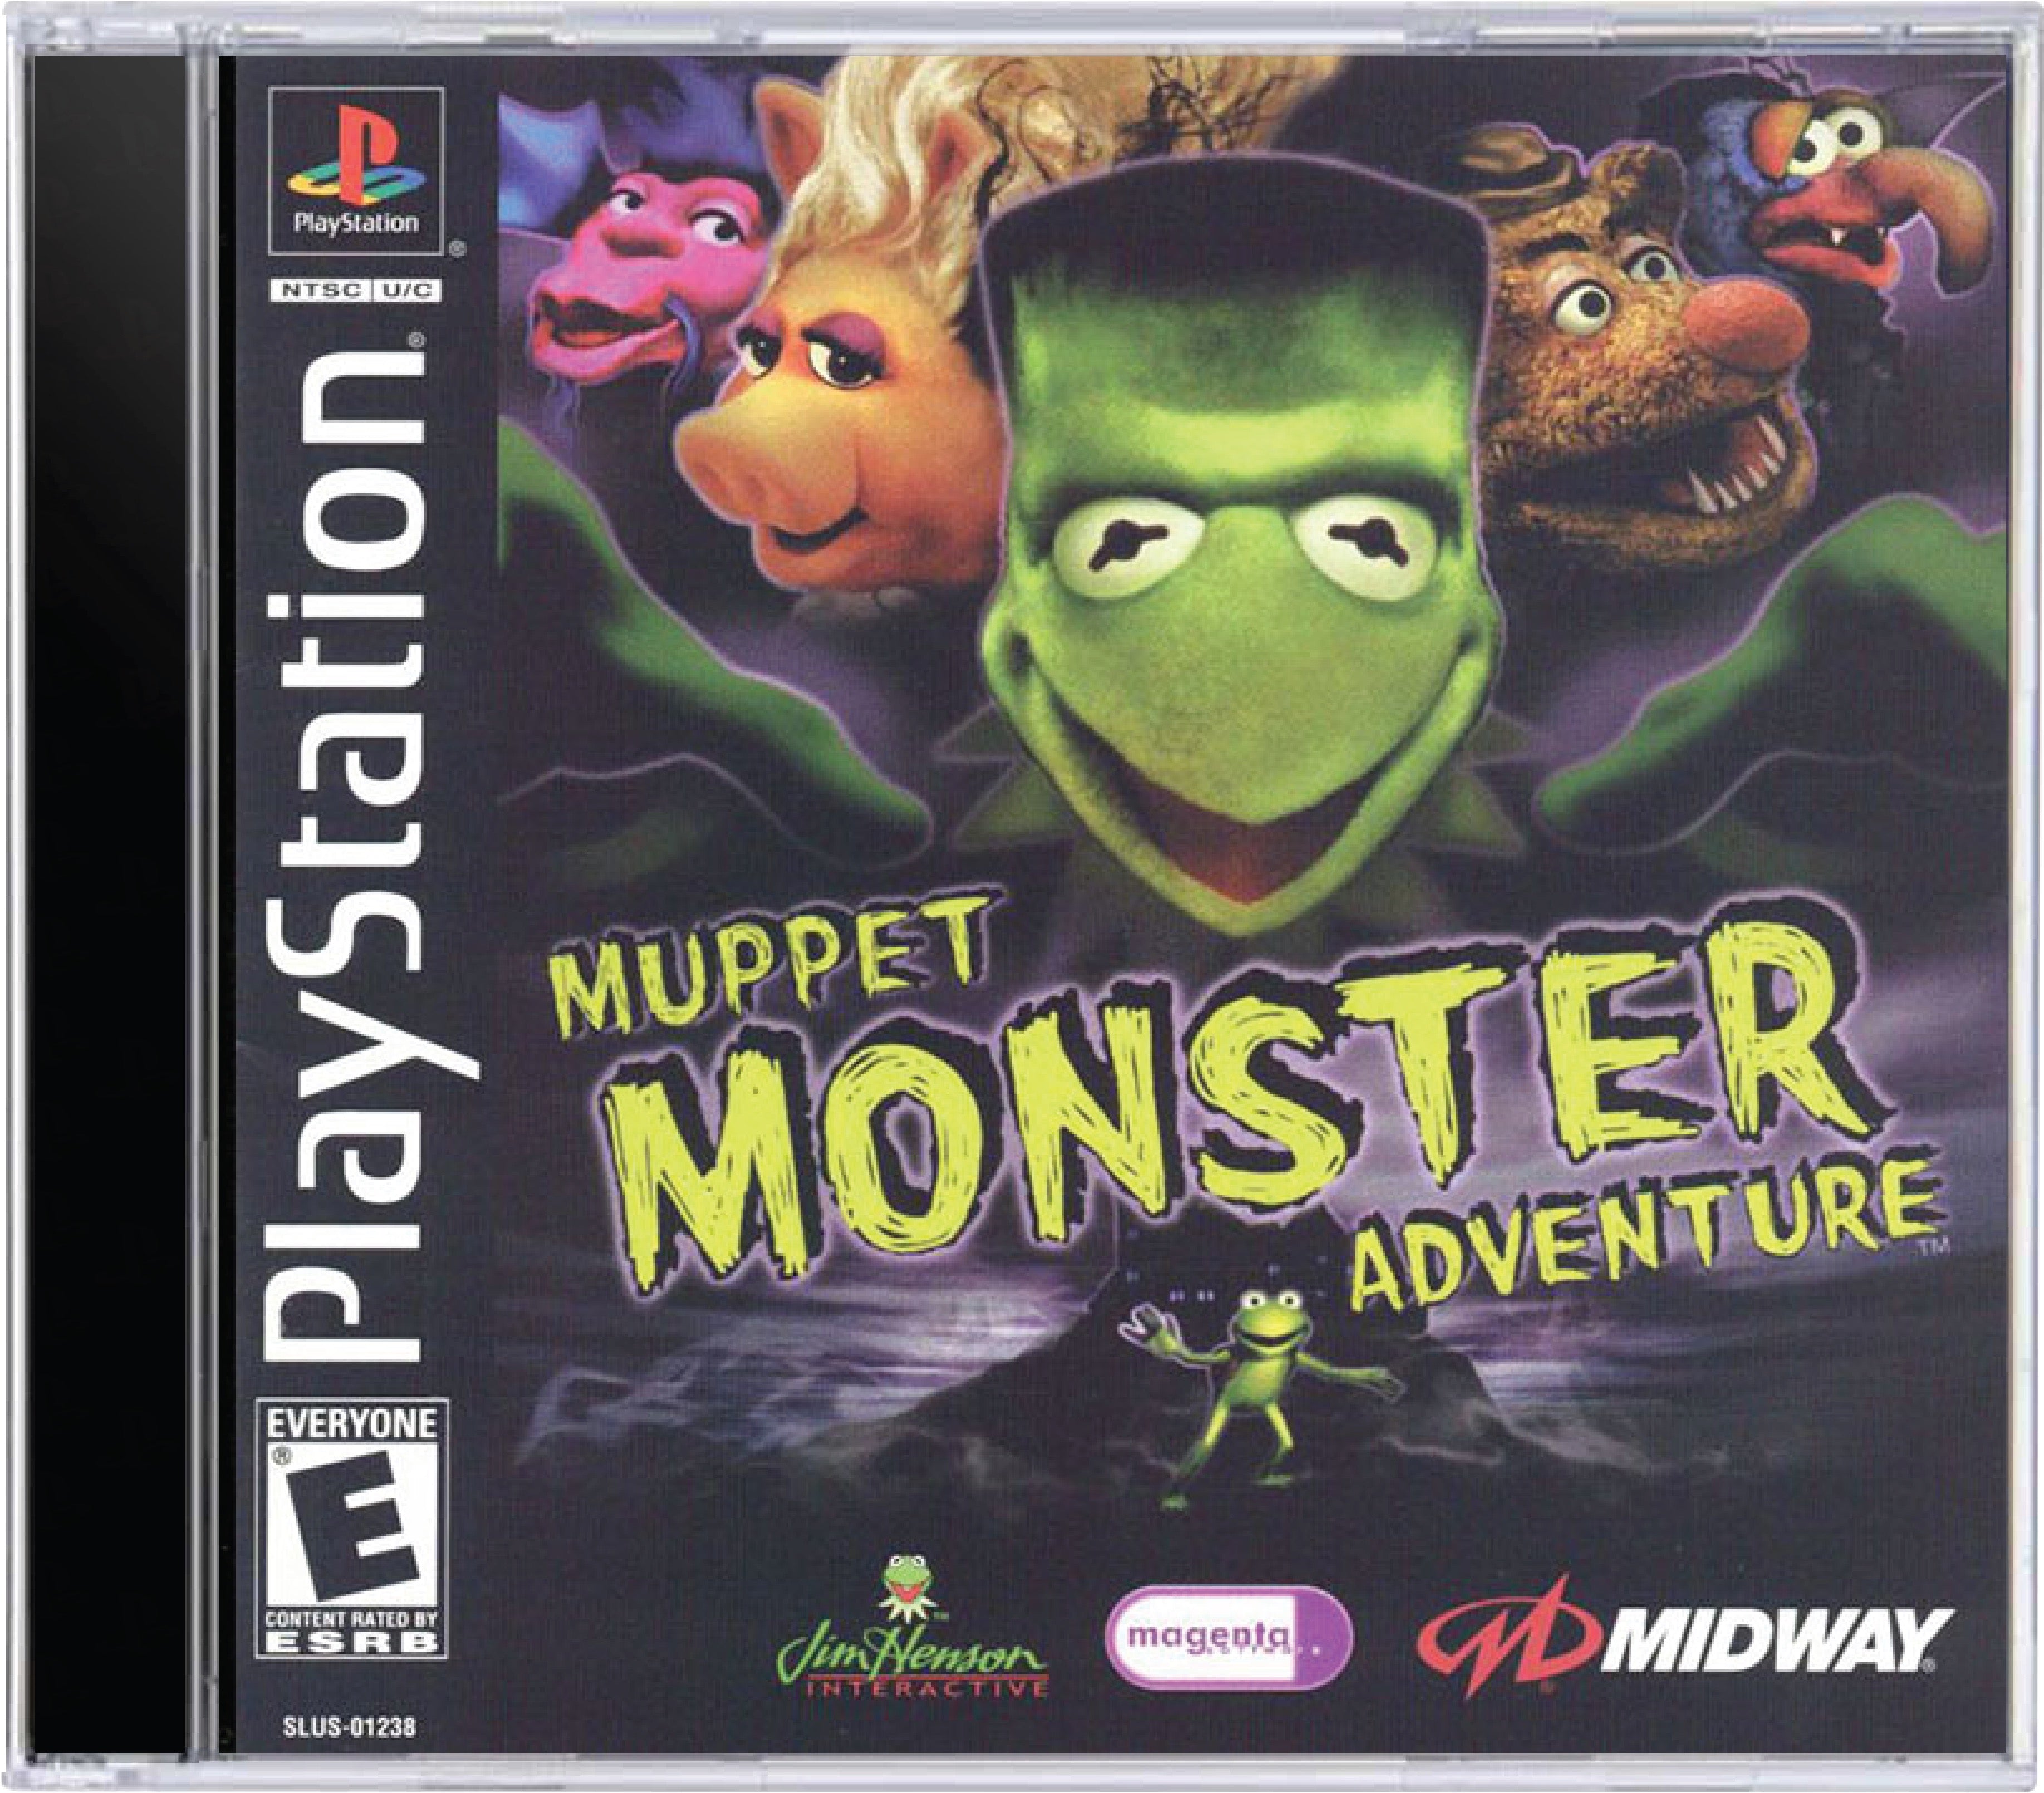 Muppet Monster Adventure Cover Art and Product Photo